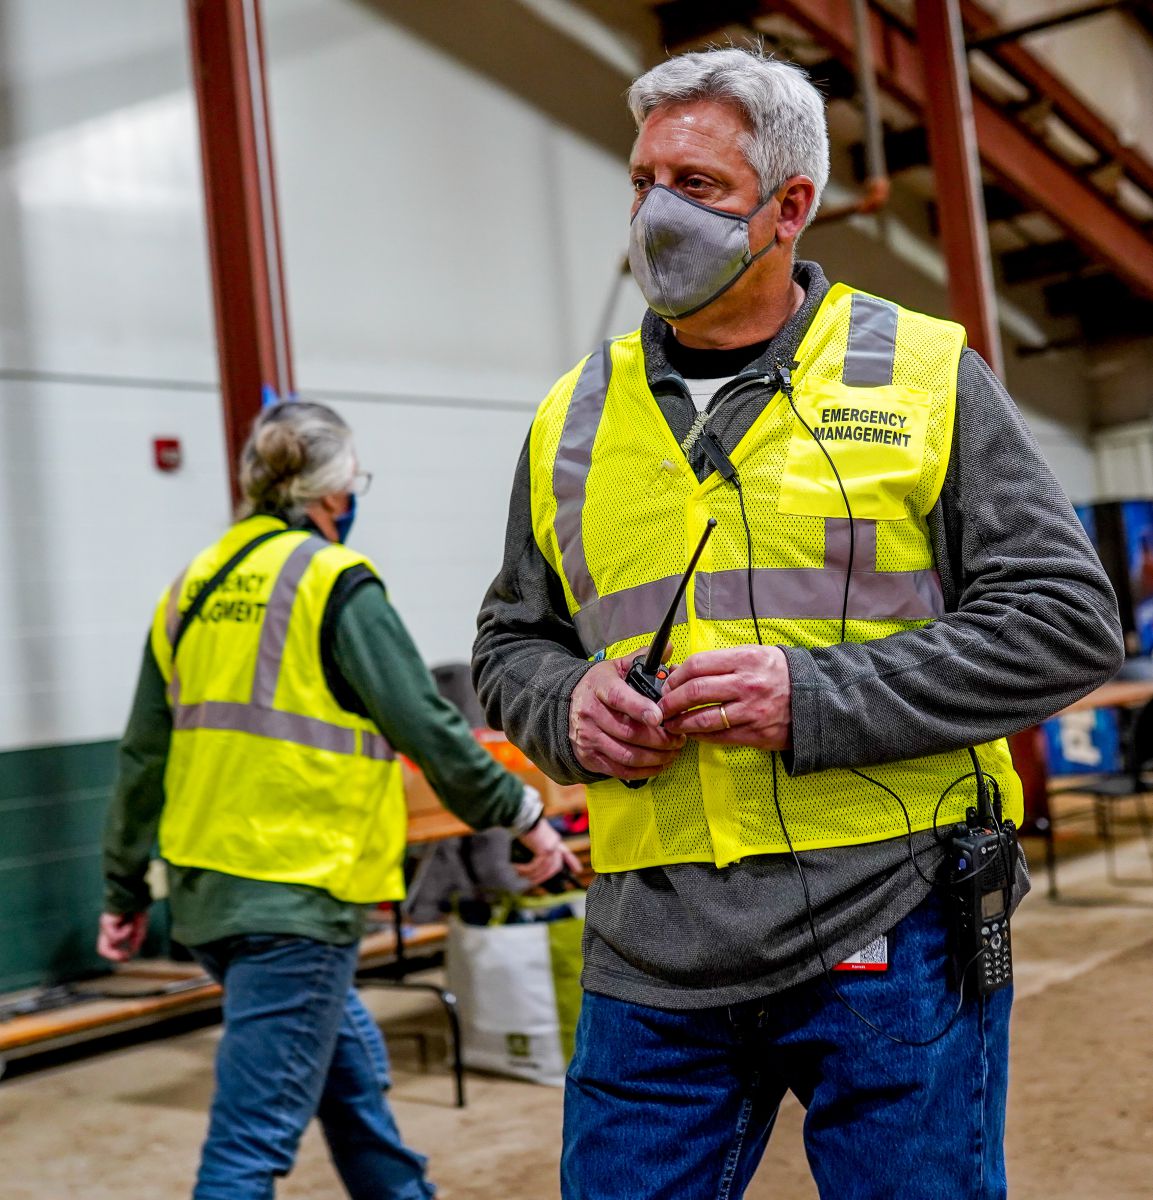 Emergency Management Director Robert Bieniecki is pictured working in February during a drive-through COVID-19 vaccination clinic at the Douglas County Fairgrounds.